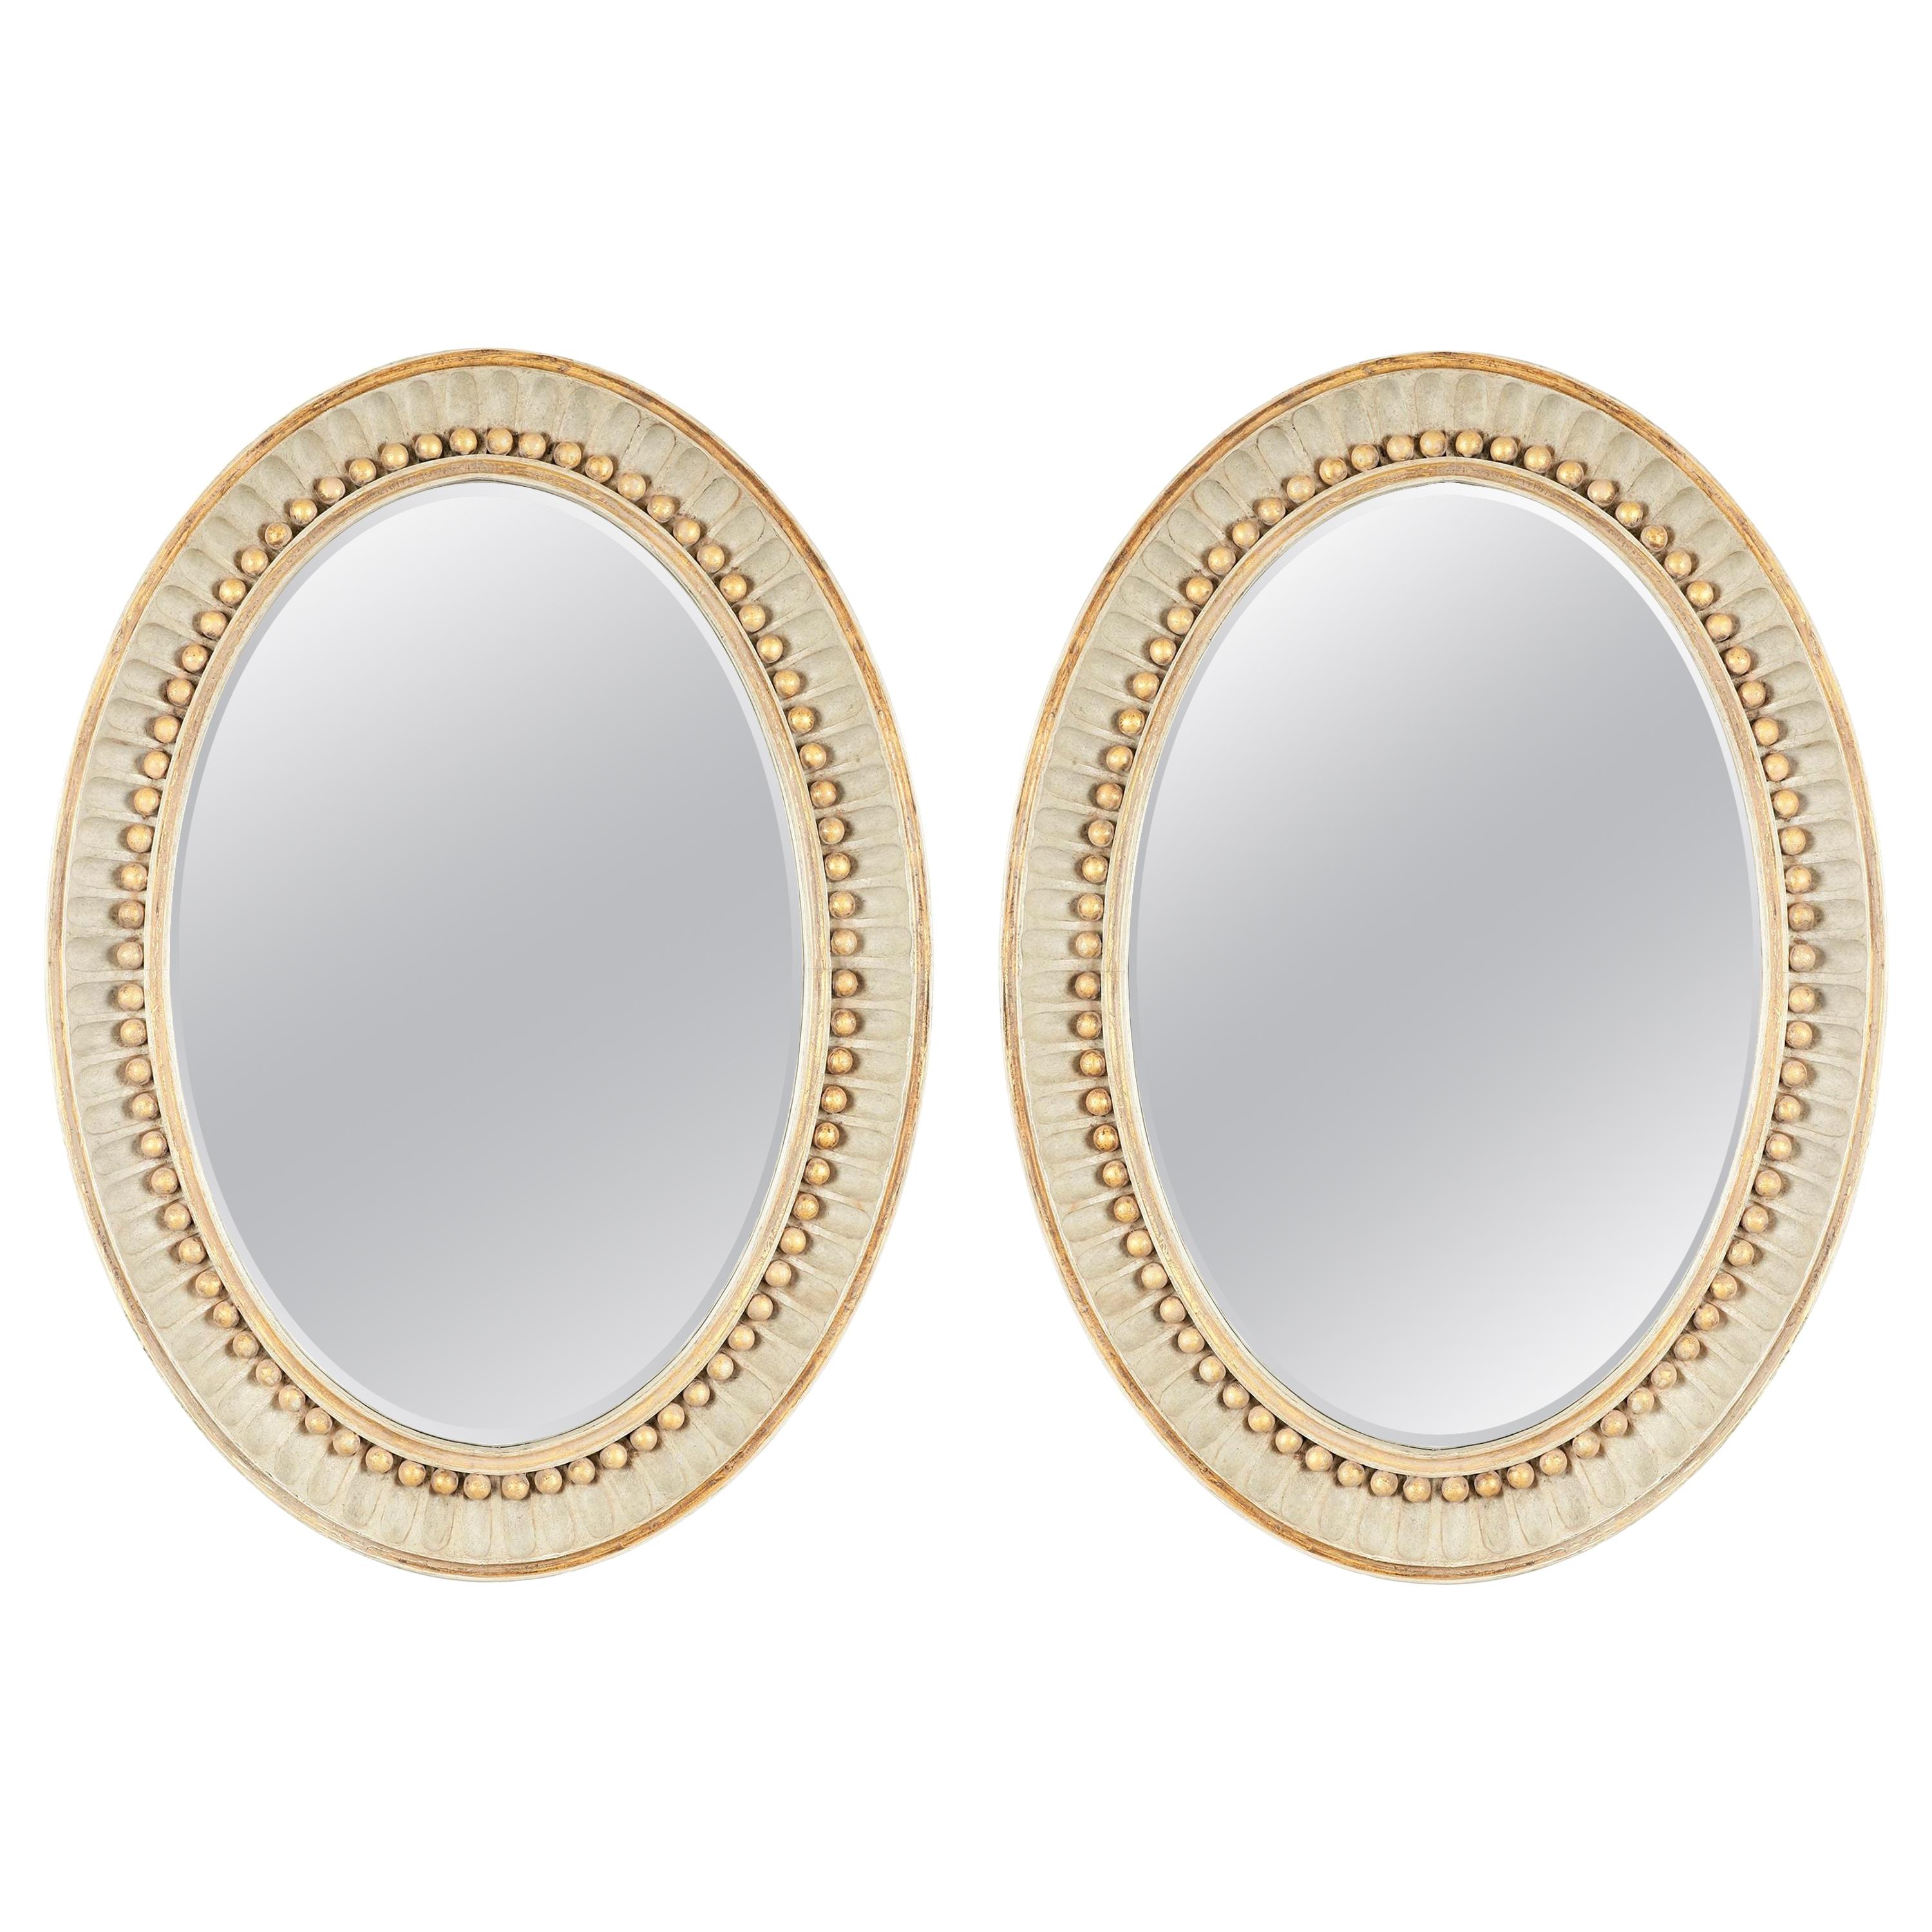 Pair of Swedish Empire Neoclassical Oval Mirrors by Charles Pollock for William